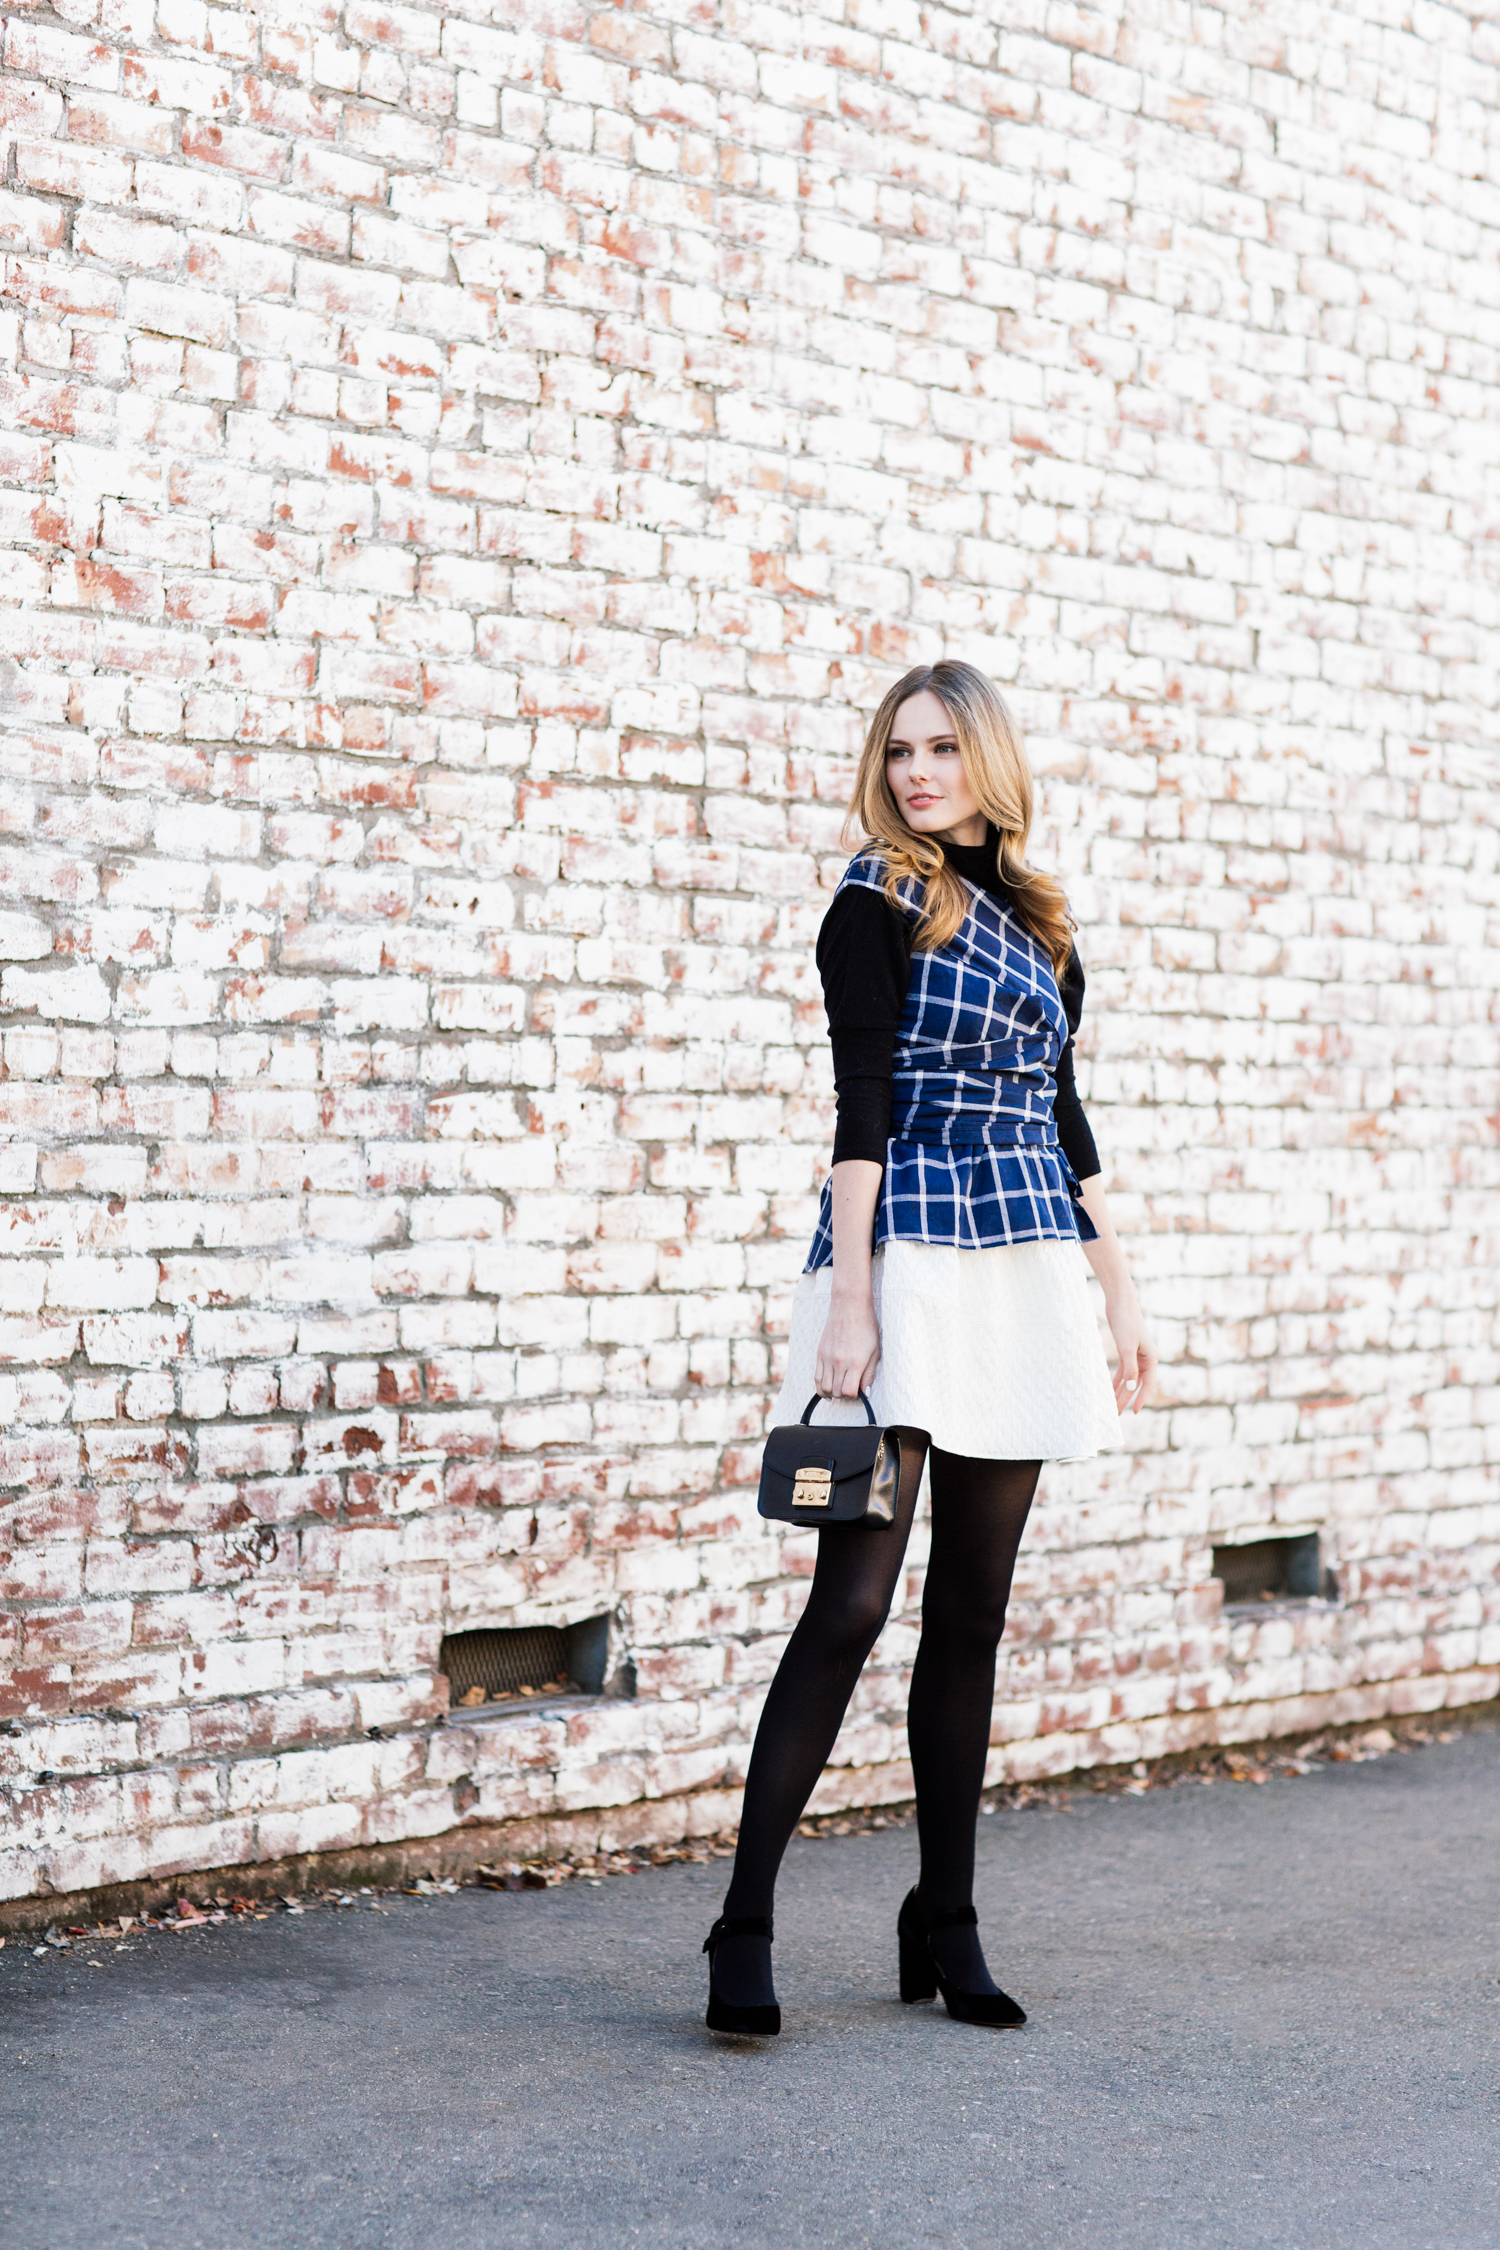 Miss USA 2011 of The A List blog wearing Stylekeepers plaid wrap top and Marc Fisher Shaylie heels